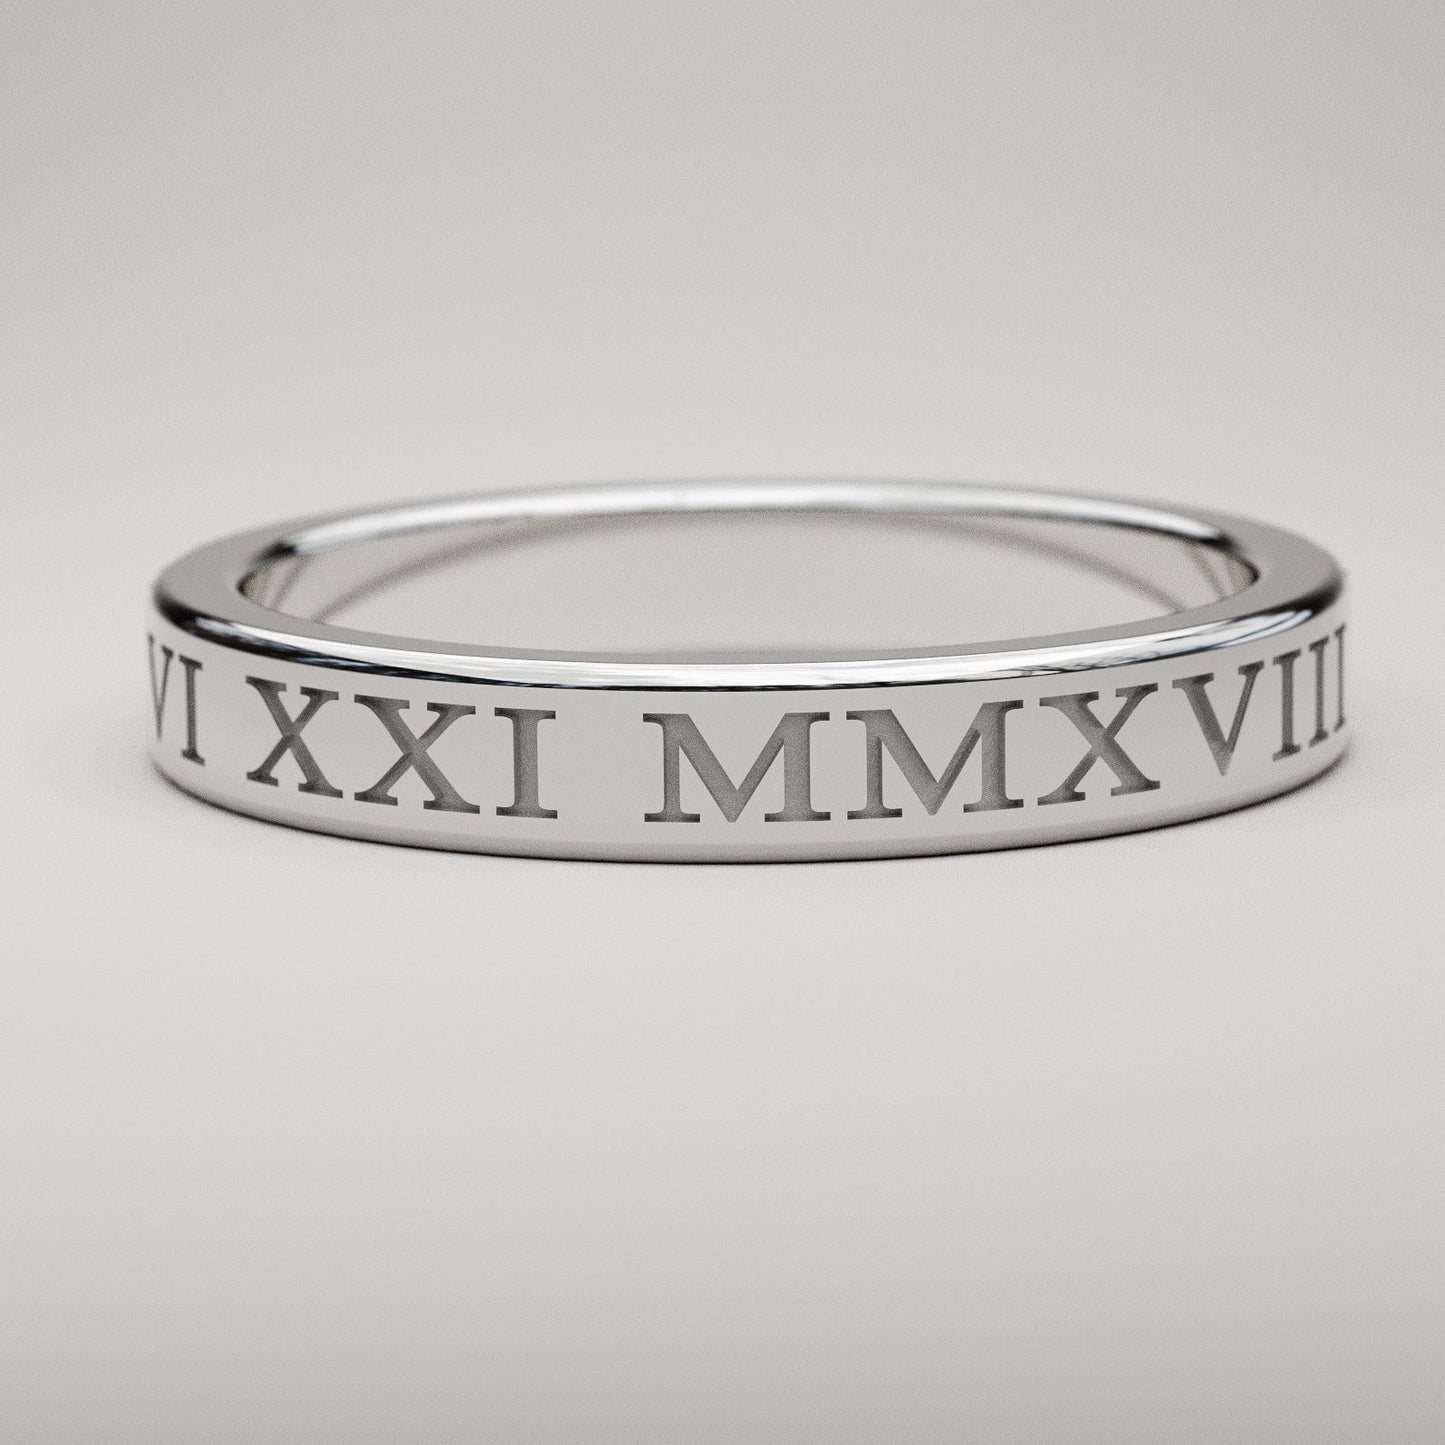 Engraved style custom Roman Numeral ring in white gold